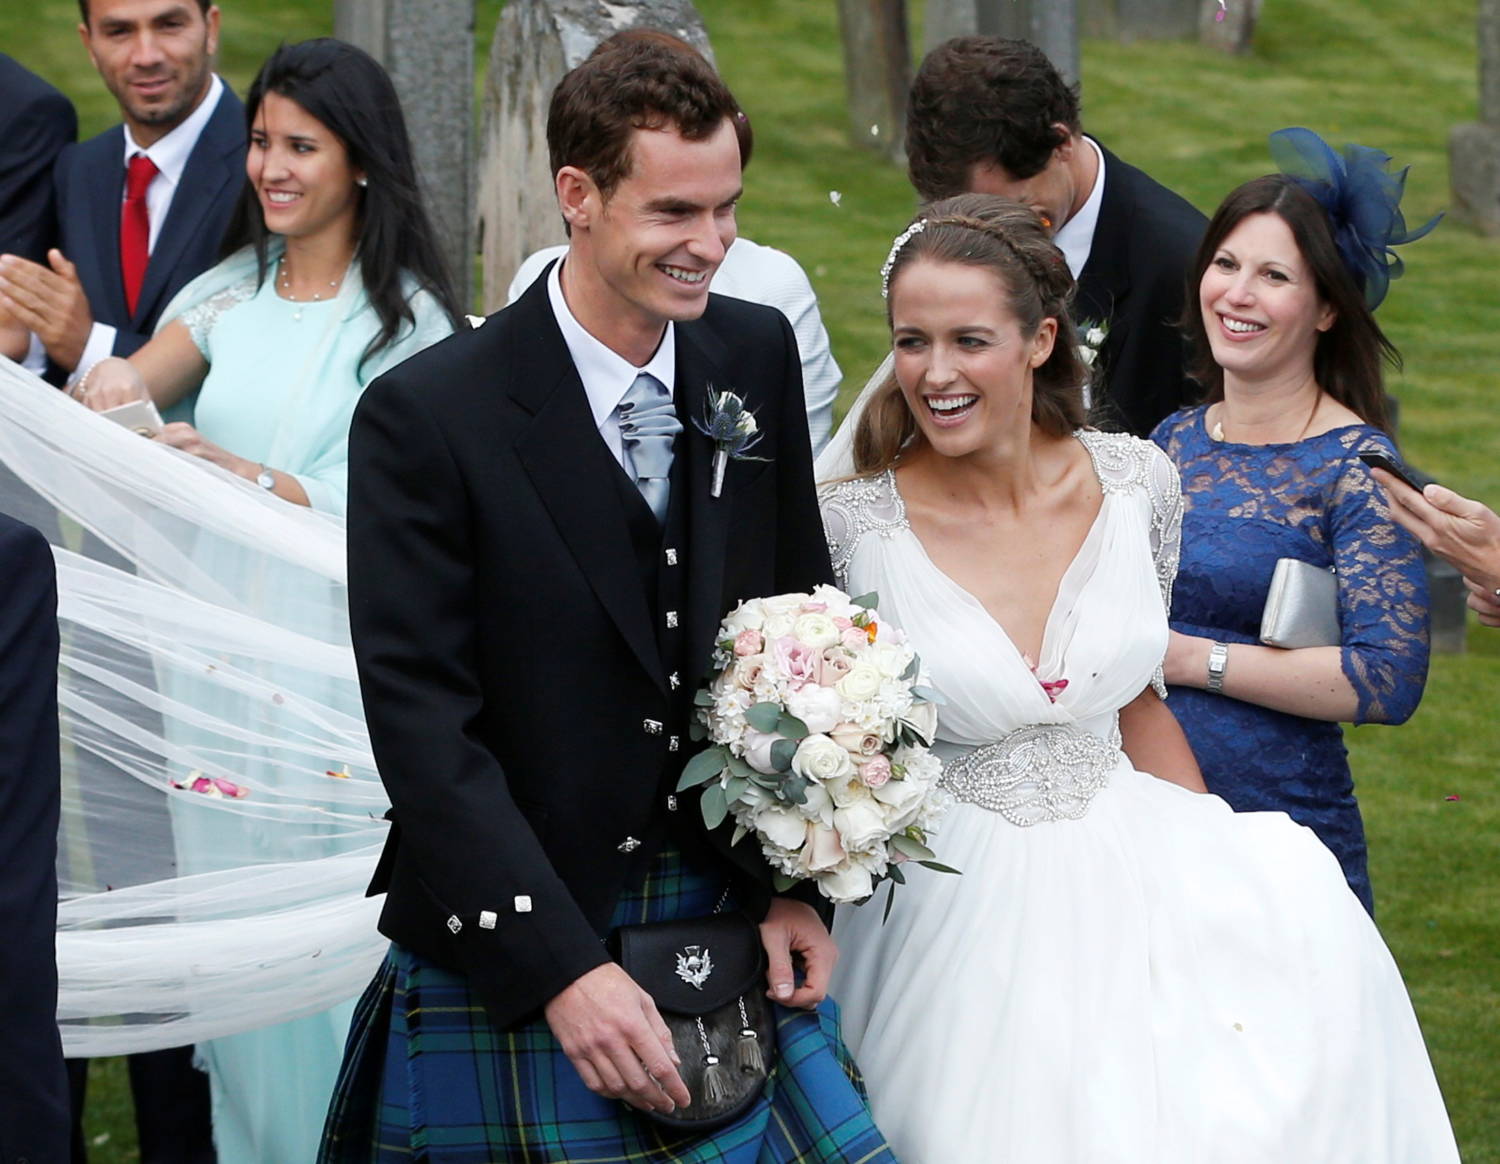 File Photo: Tennis Player Andy Murray Leaves After His Wedding To His Fiancee Kim Sears In Dunblane, Scotland